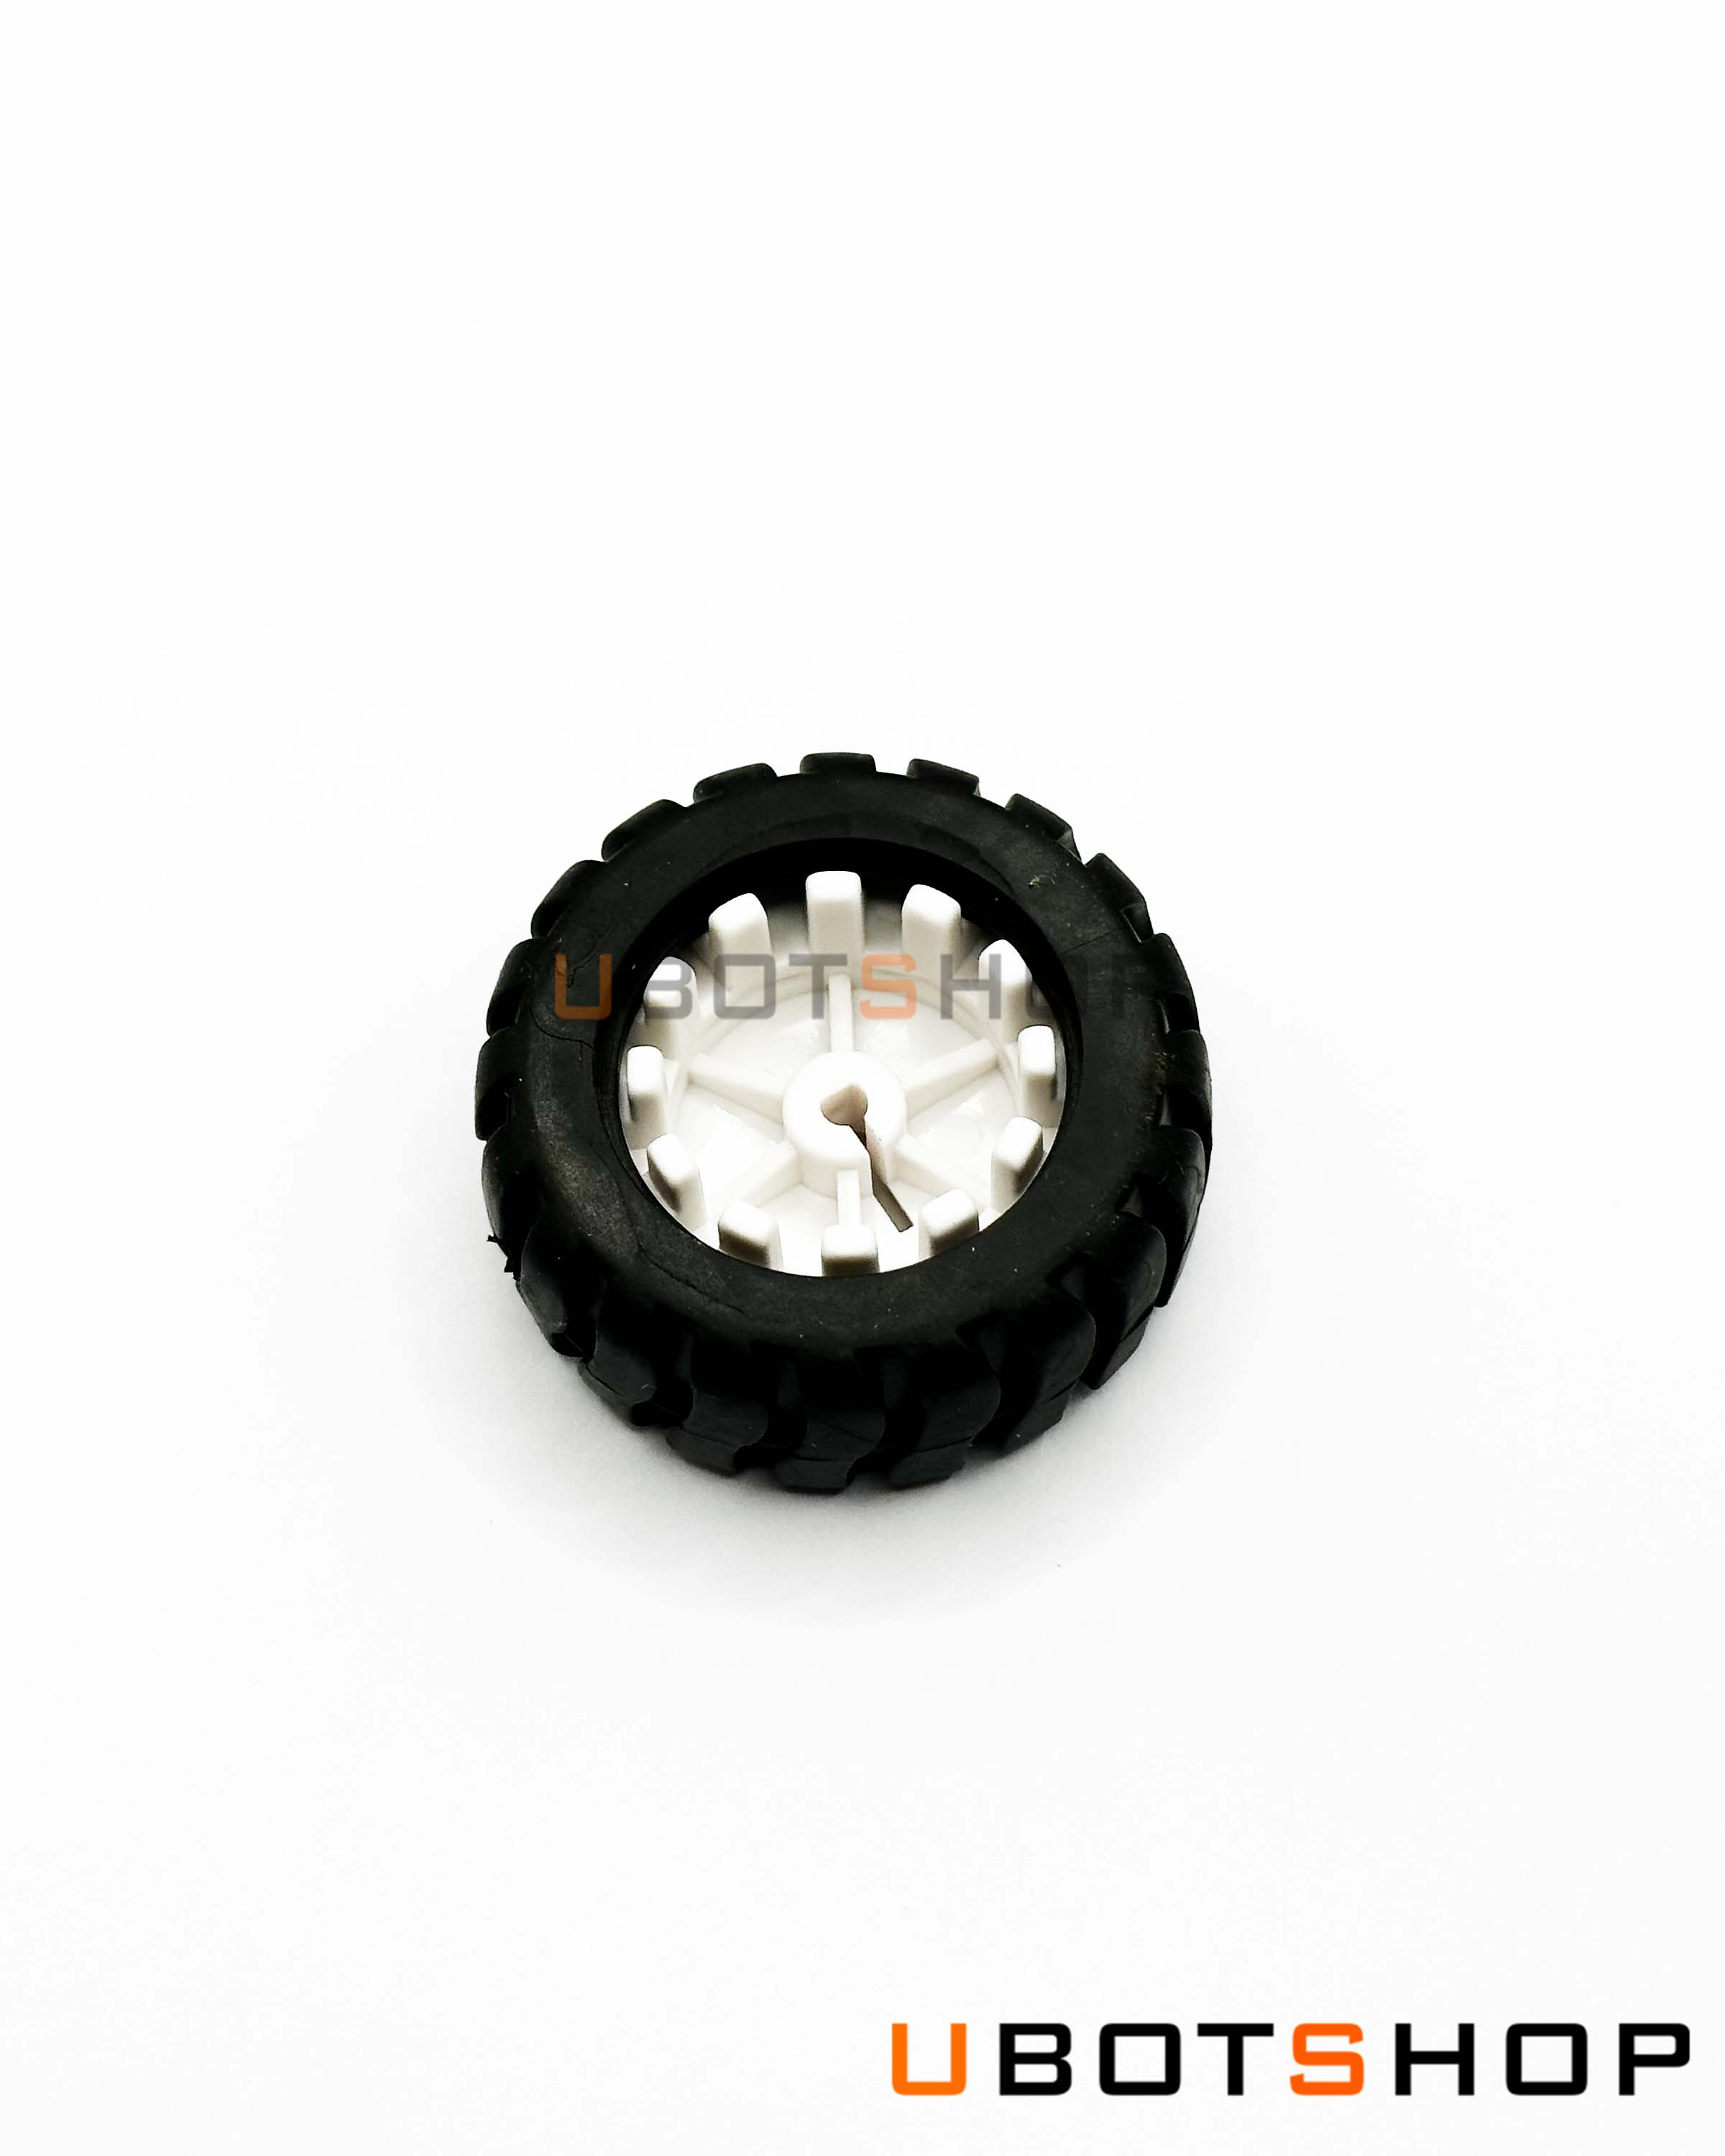 D axis rubber tire(AW0004)